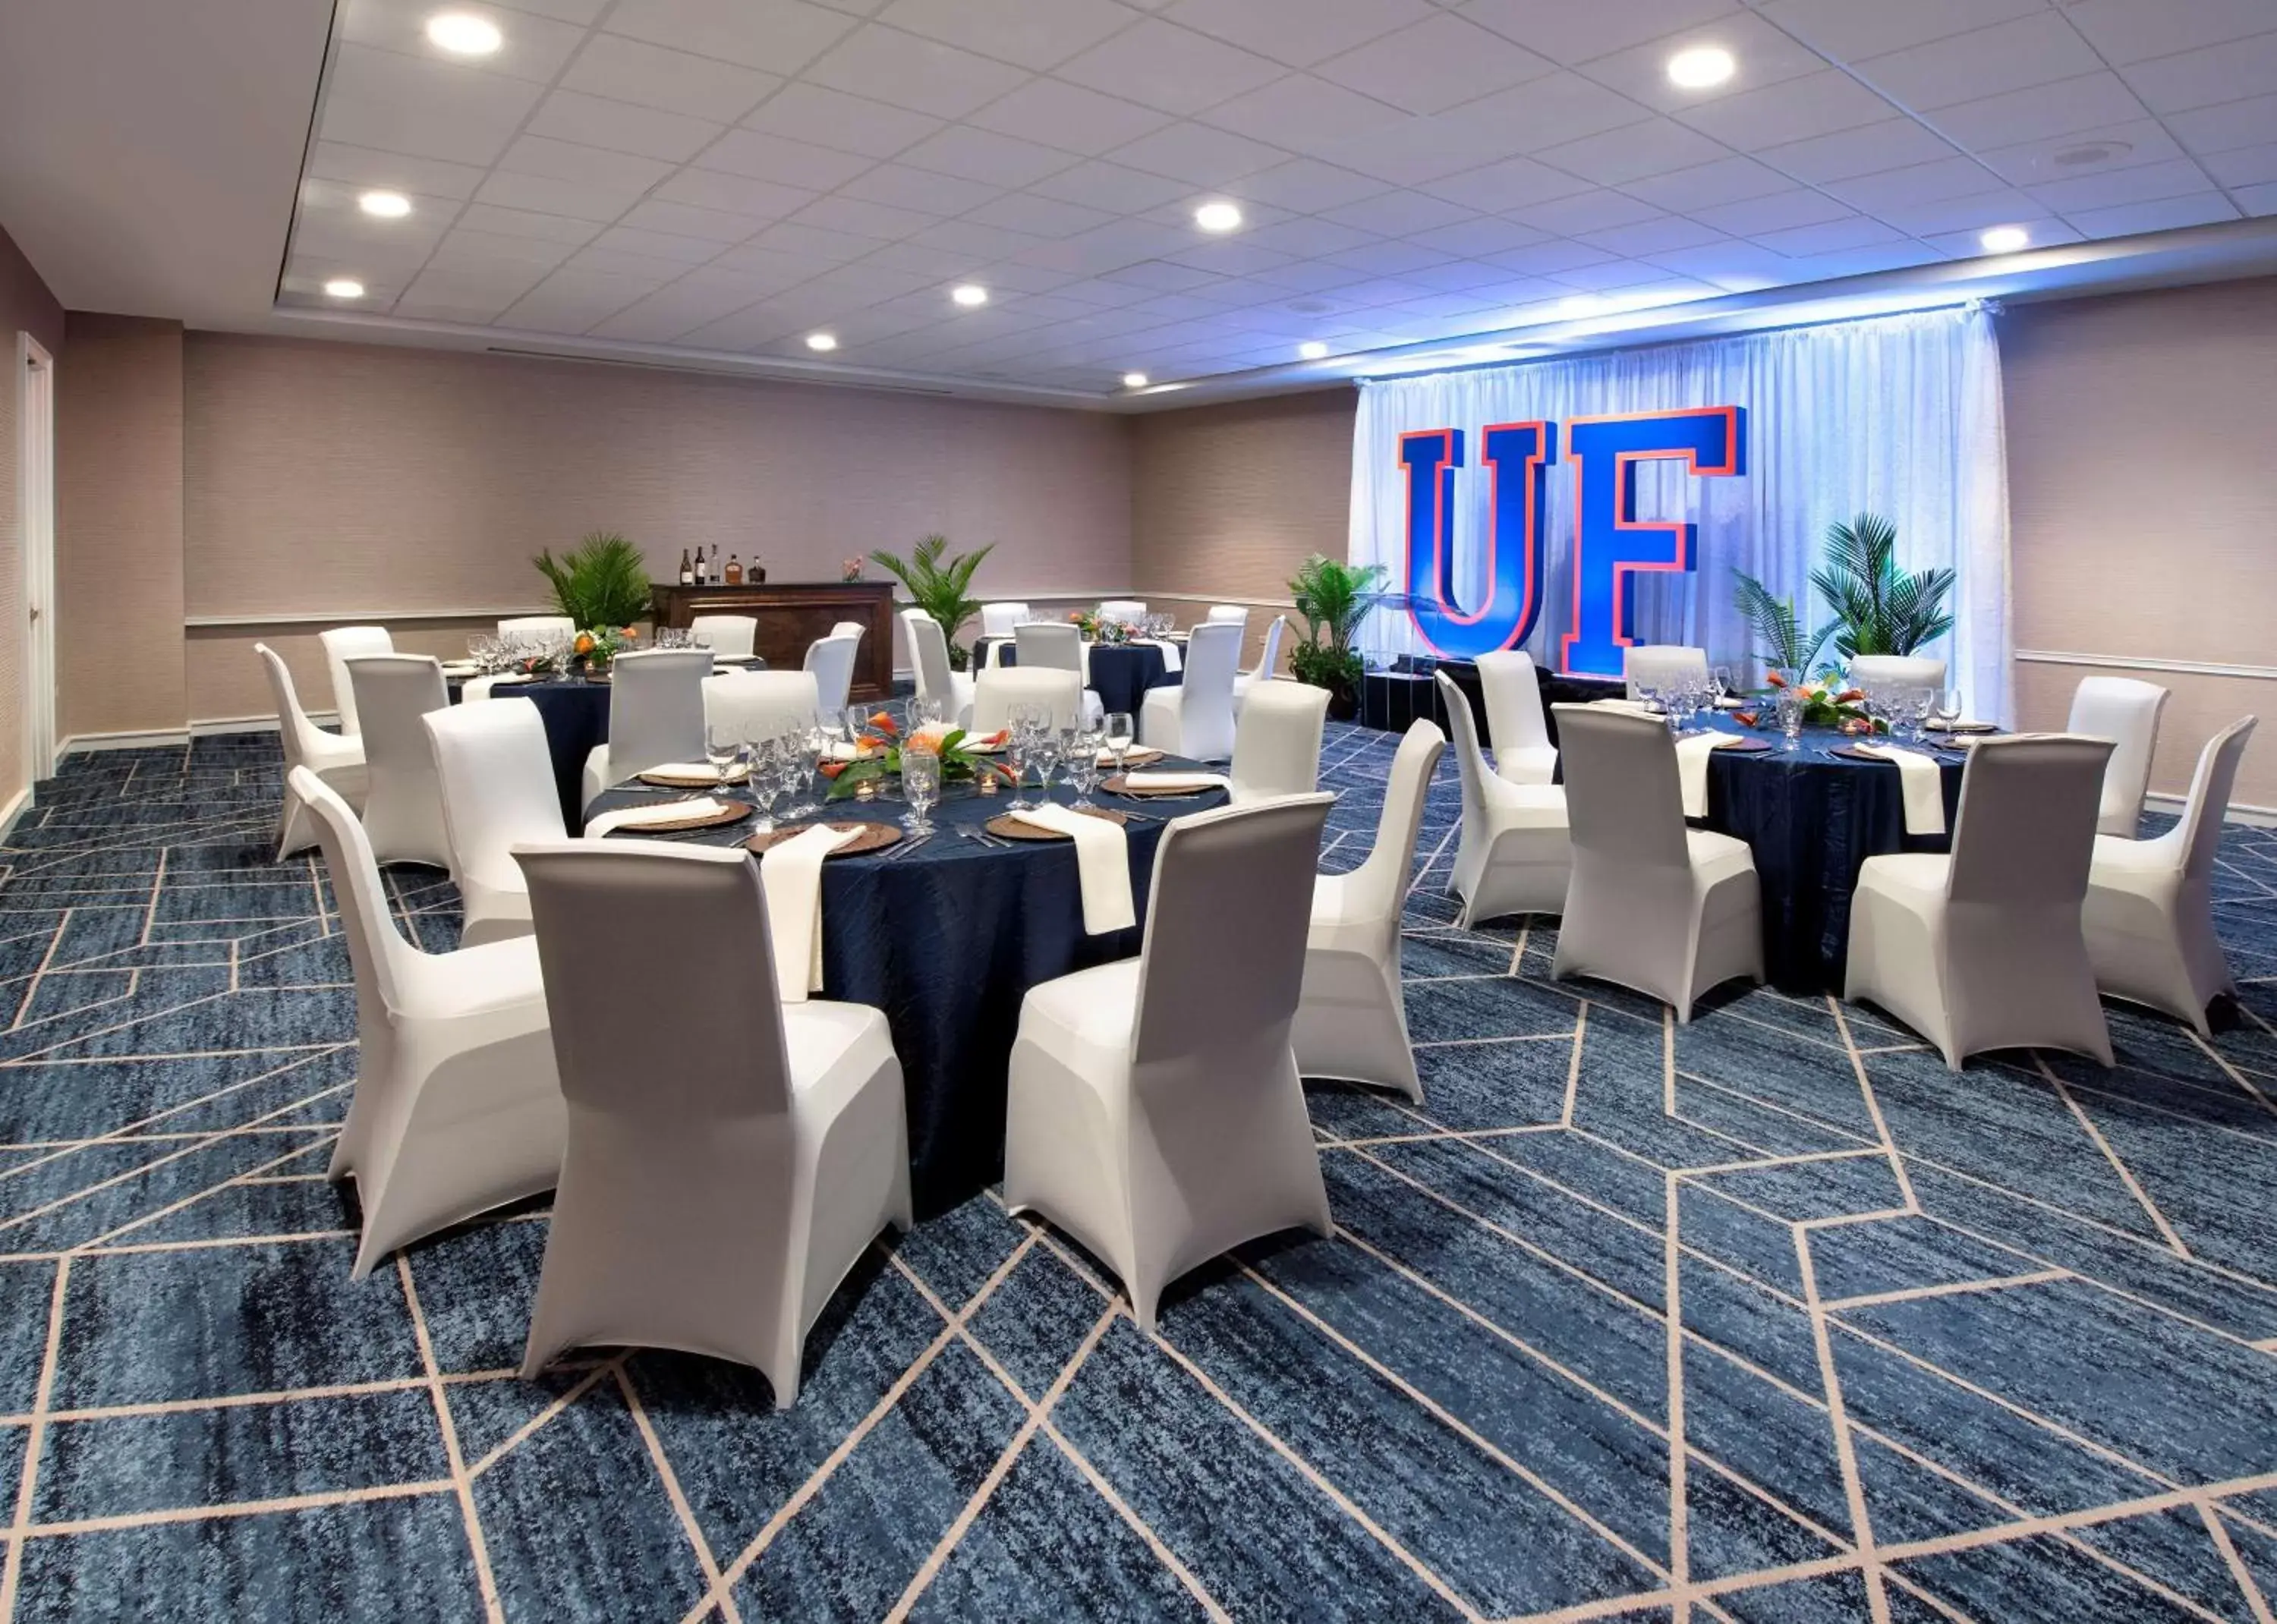 Meeting/conference room, Banquet Facilities in Hilton University of Florida Conference Center Gainesville